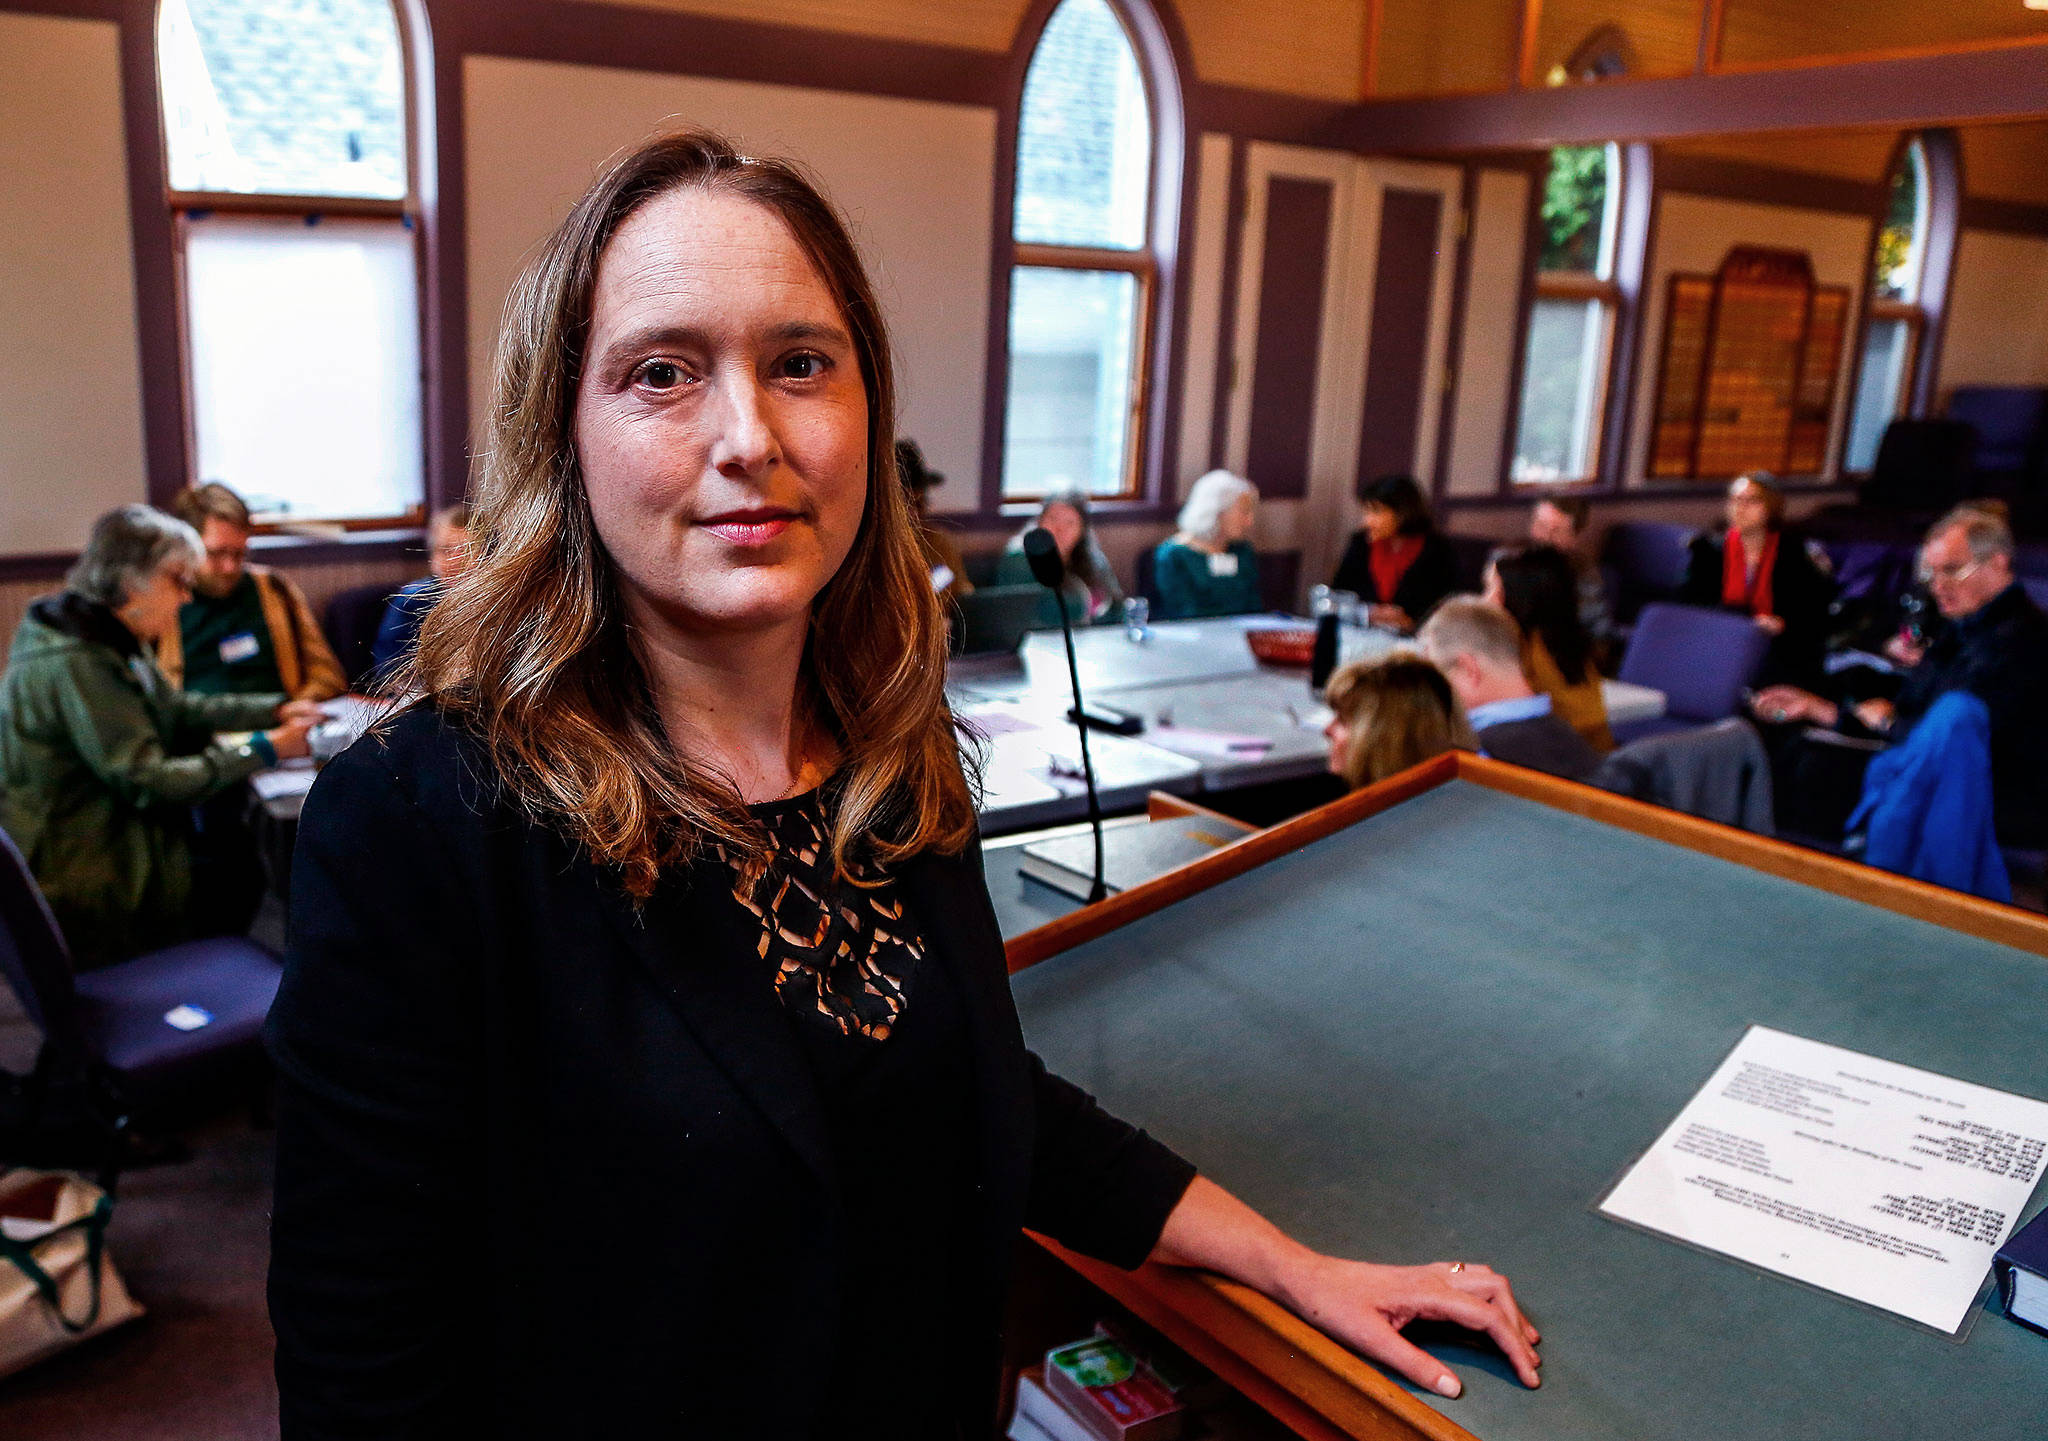 Everett’s Temple Beth Or welcomed Rabbi Rachel Kort this summer. With a public vigil planned for Thursday, the rabbi talks about how her synagogue is responding to the weekend killings in Pittsburgh. (Dan Bates / The Herald)